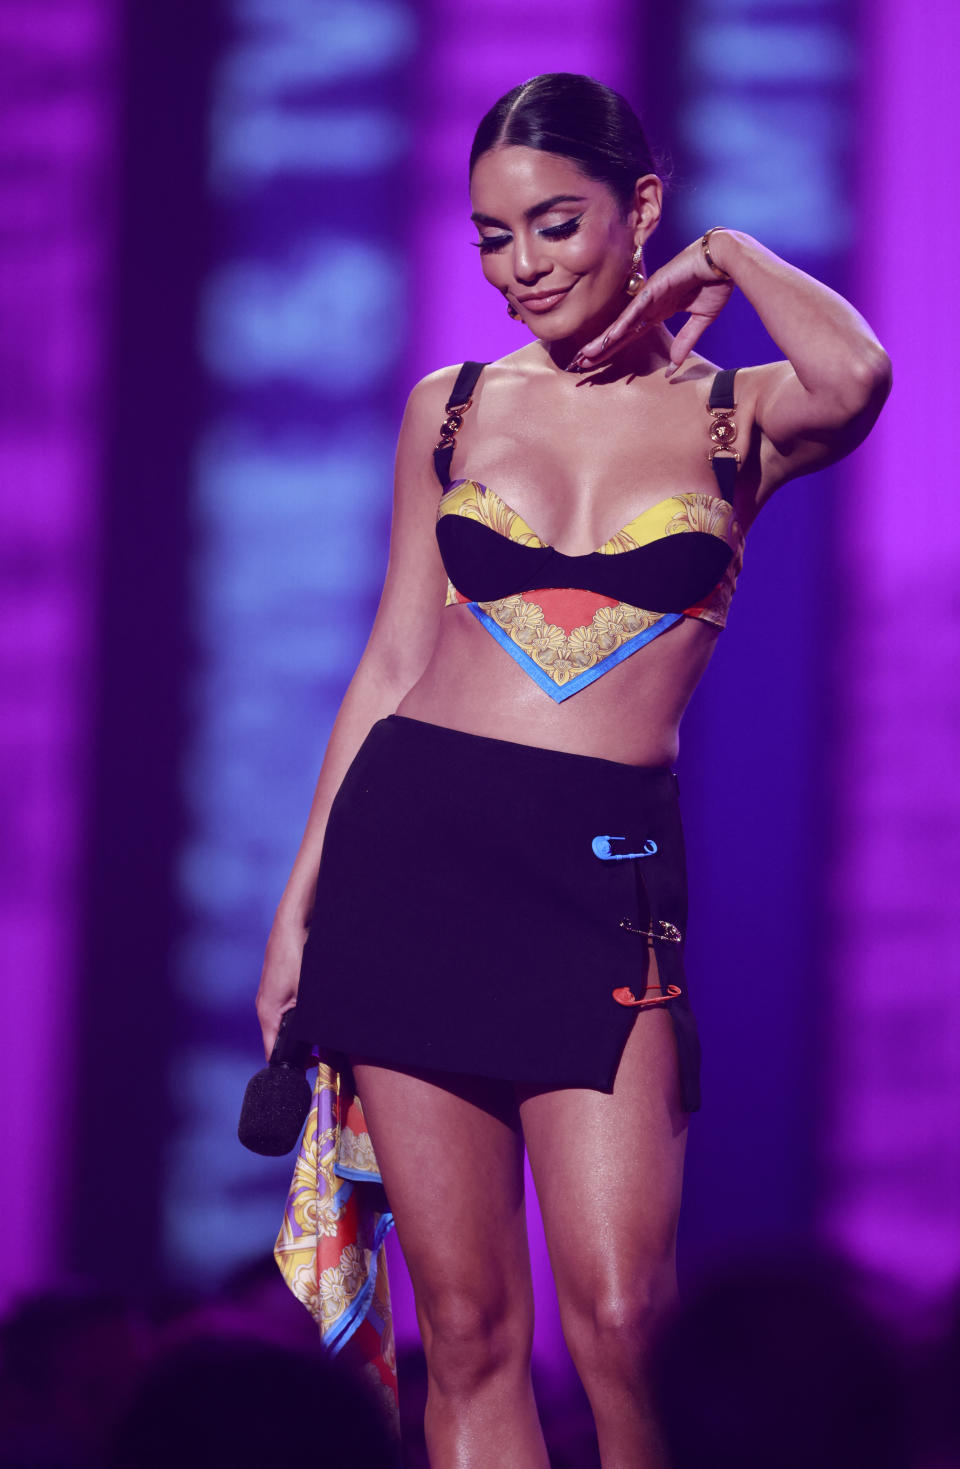 Vanessa Hudgens on stage in a stylish, colorful bralette and black mini skirt, holding a microphone